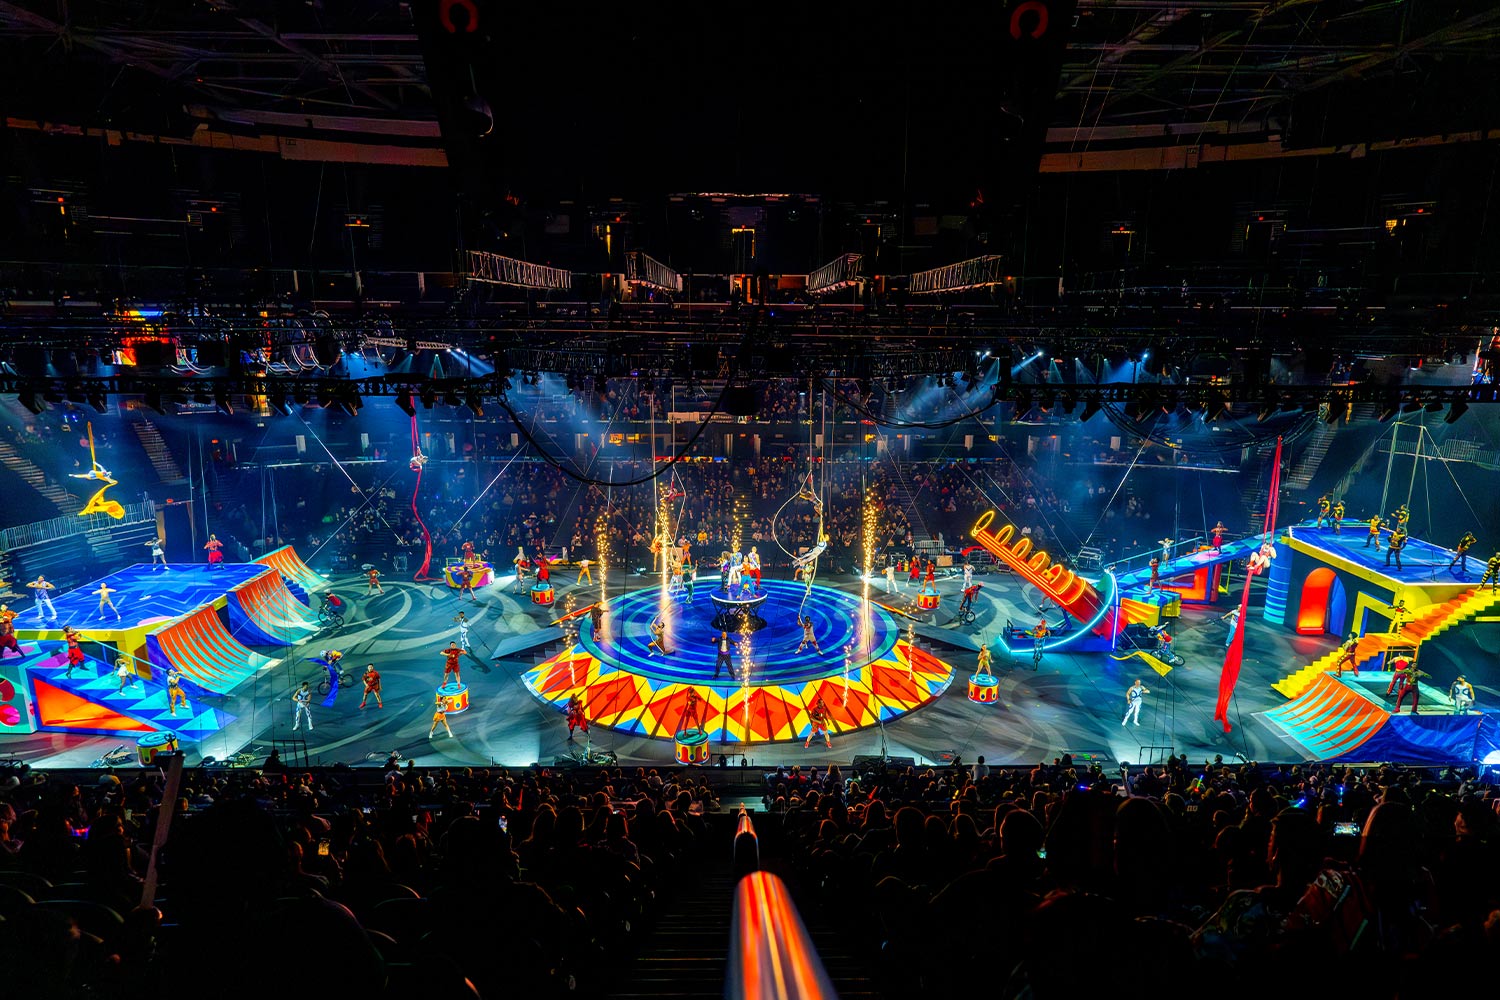 Wide shot of the entire circus arena performance